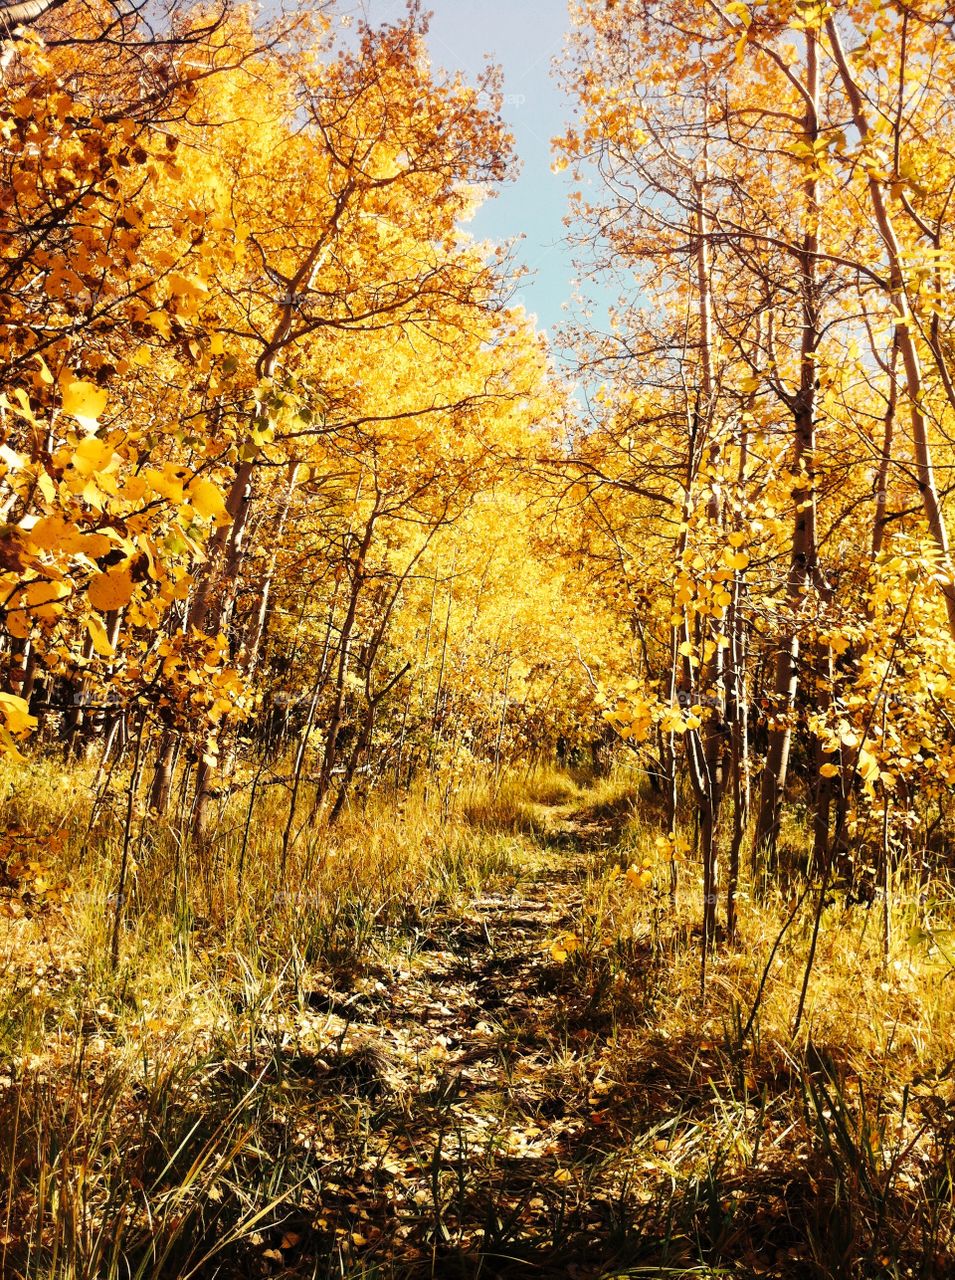 The path to Autumn. If ever there was magic in this world, this is the place where one would find it.

Photo taken in Laramie, WY.